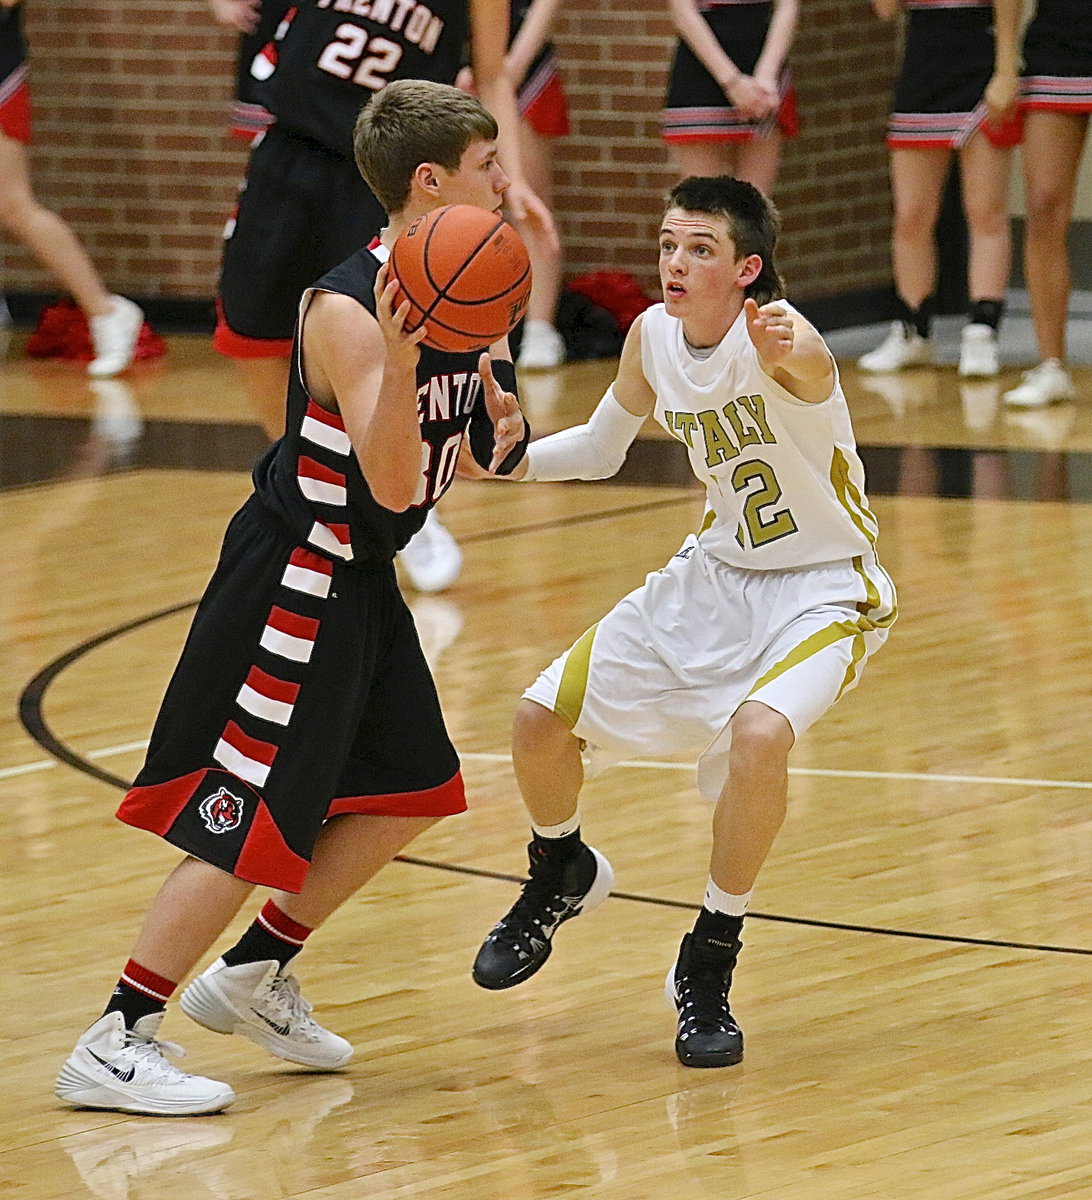 Image: Italy’s Ty Windham(12) mans up against a Trenton ball handler.